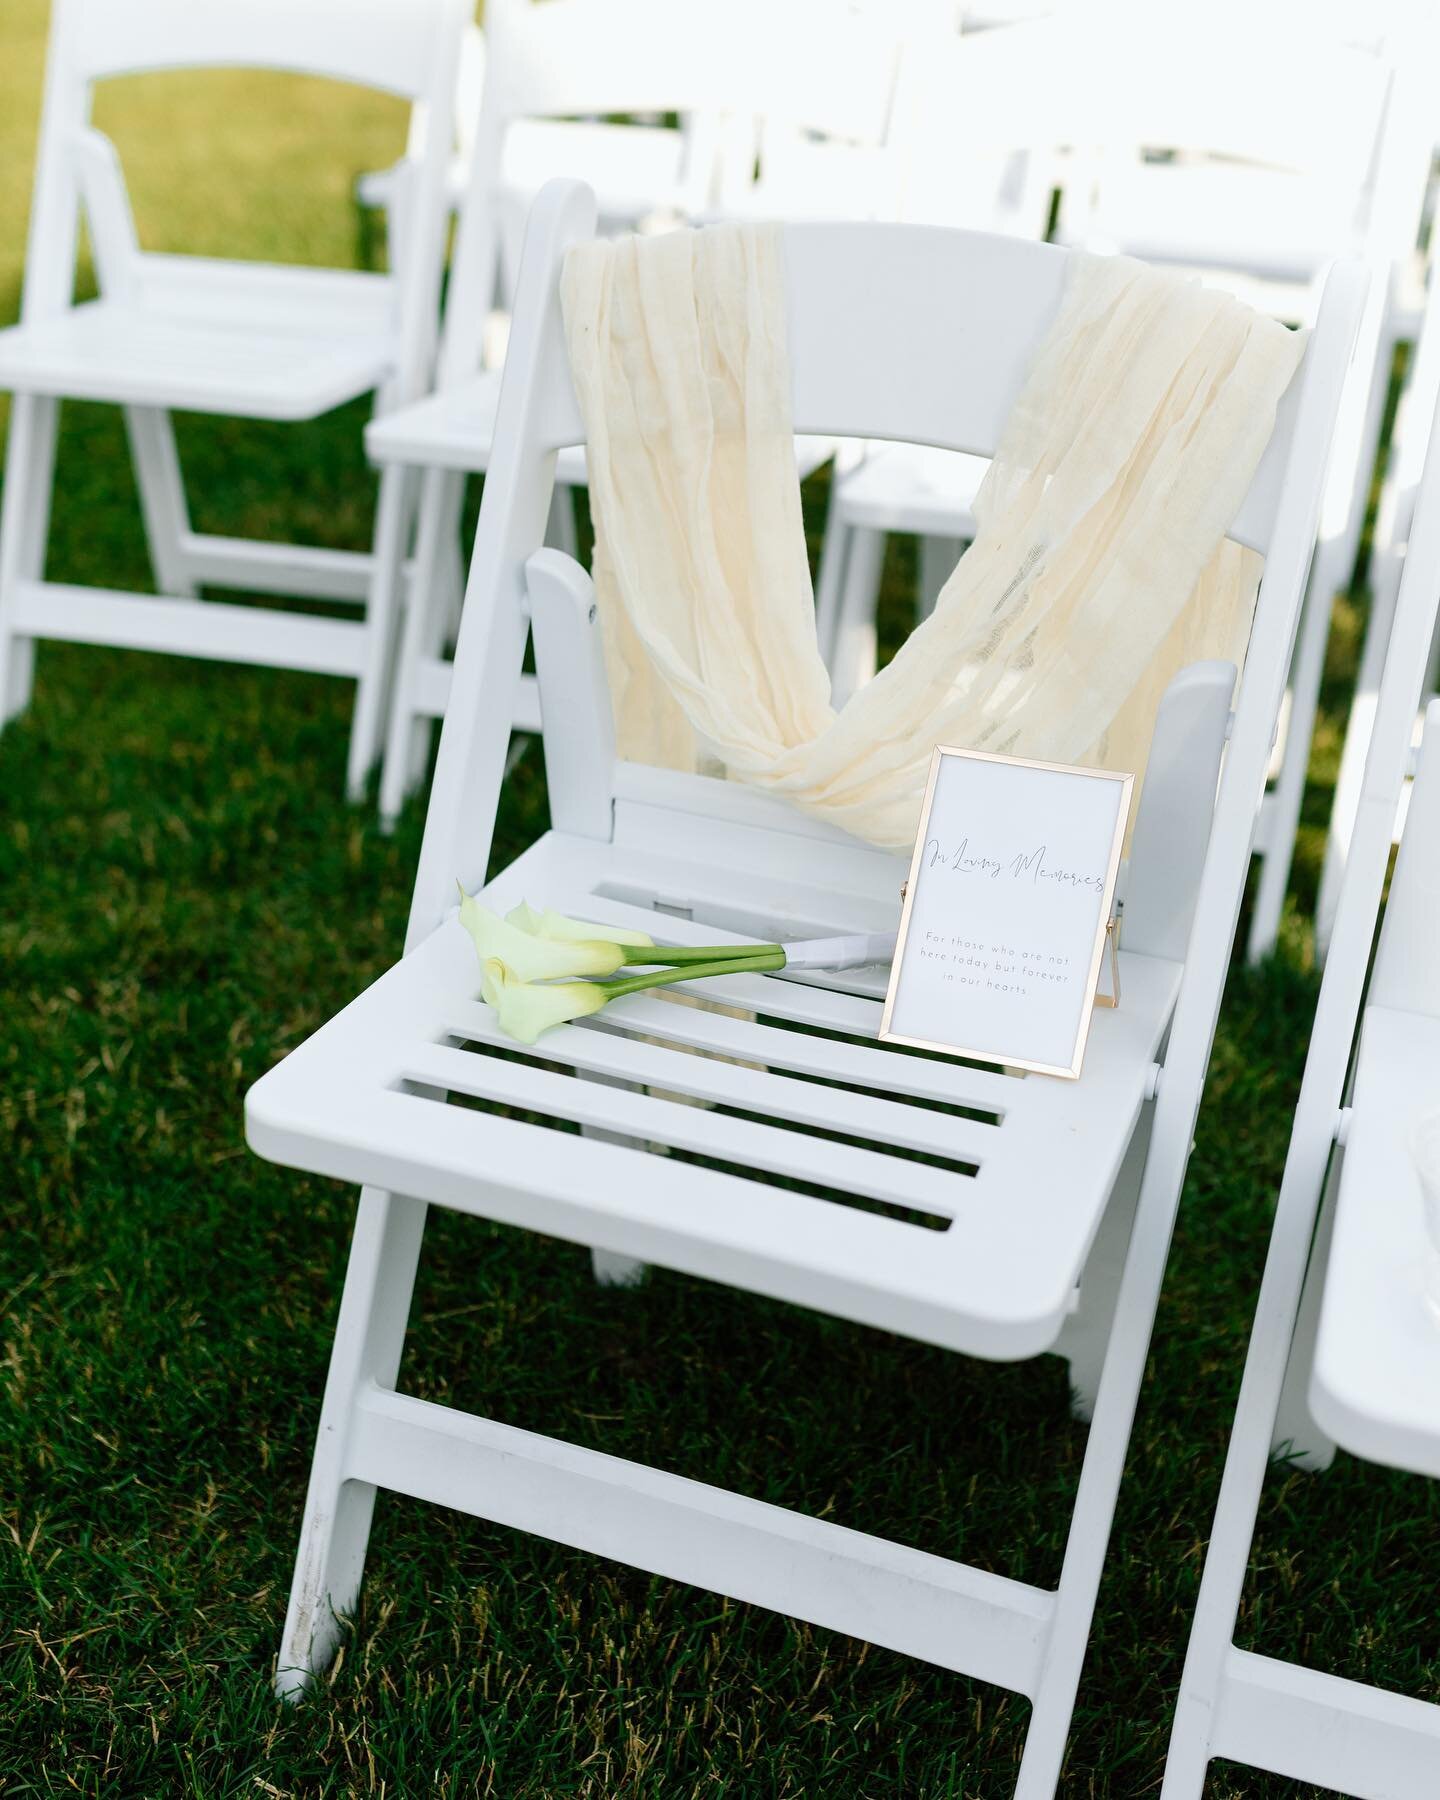 Details like these for the ceremony are the sweetest little touch &amp; always make me tear up just a little. If only heaven wasn&rsquo;t so far away but I like to think they have the absolute best front row sky seating to watch 🥹🤍
.
.
.
.
.
#north